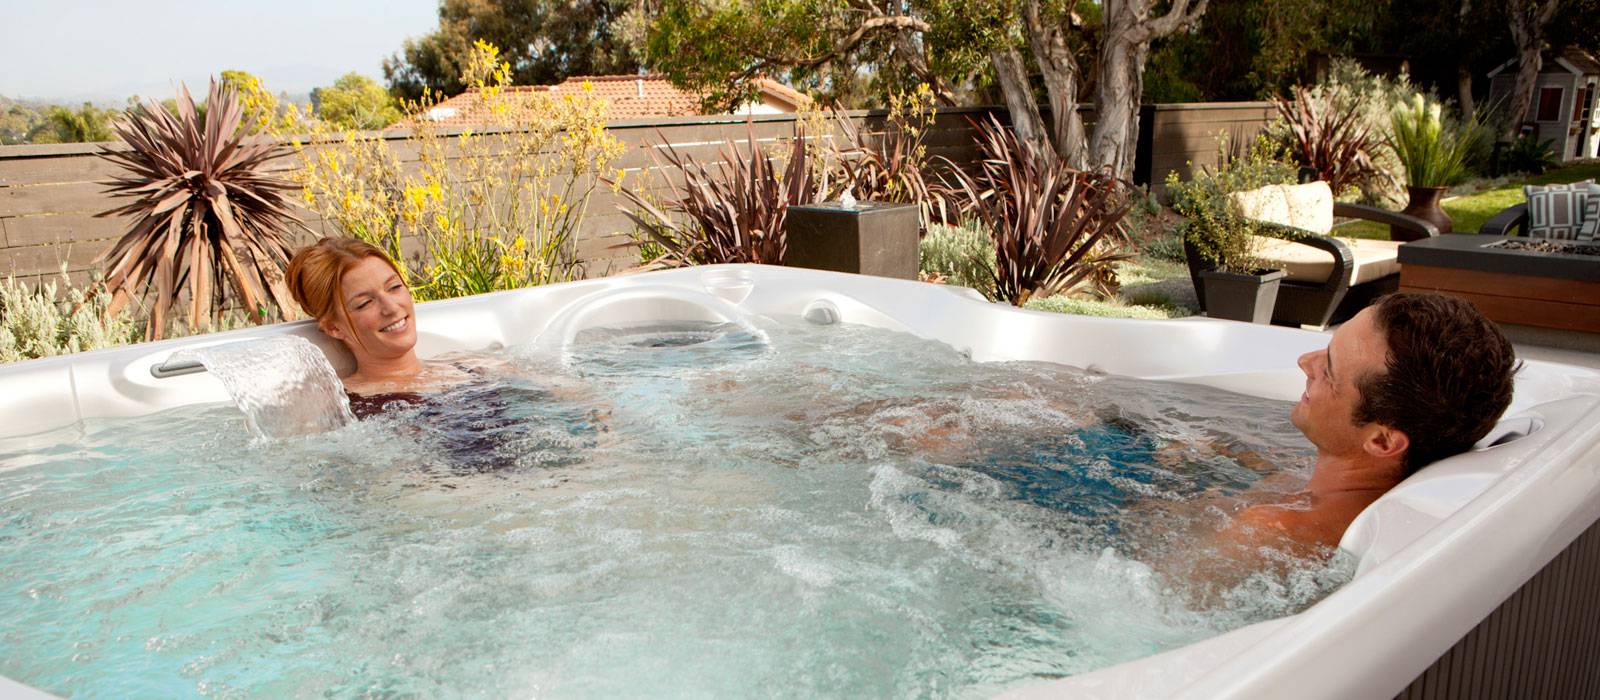 There’s room for 6 in the spacious Relay hot tub, with innovative features and powerful, soothing jets. Soak with your friends or bring the family together for quality time in the spa.